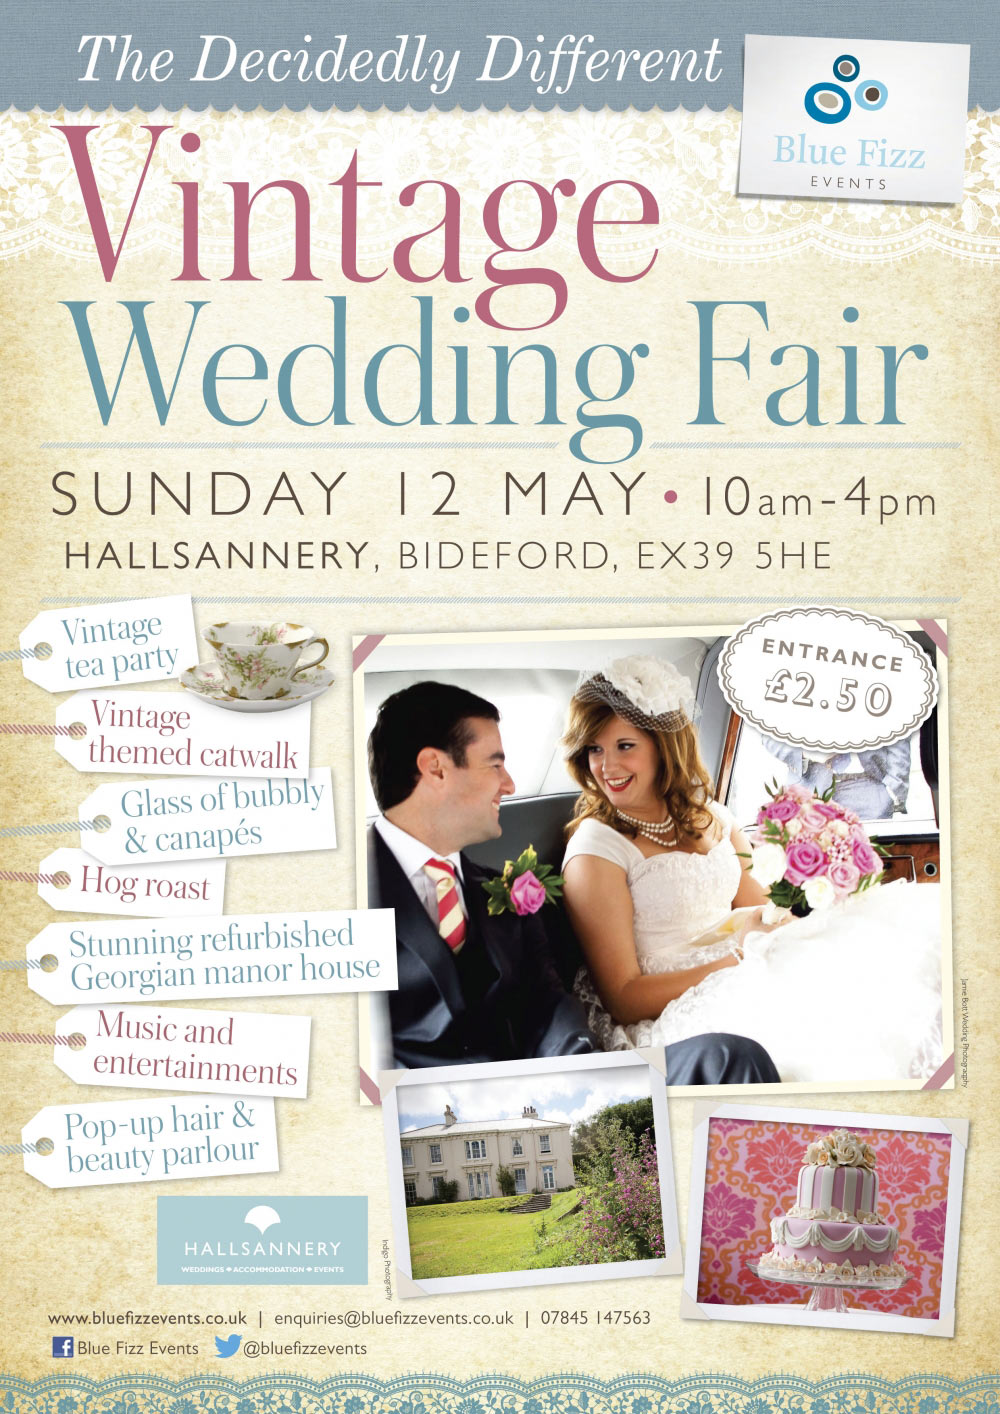 The ‘Decidedly Different’ Vintage Wedding Fair